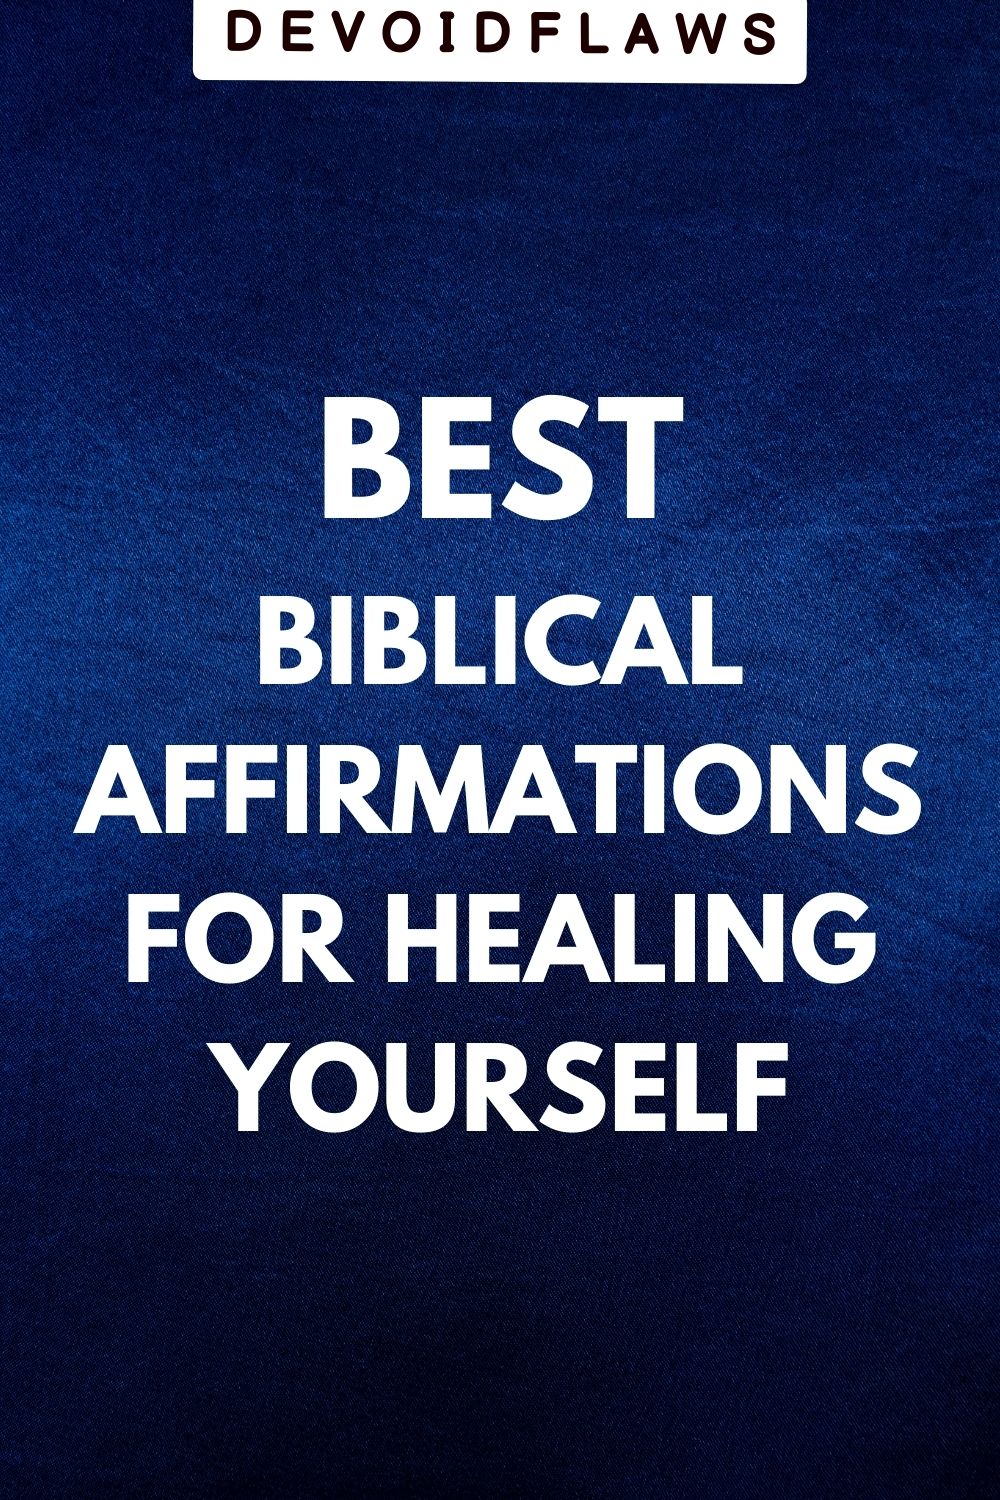 blue background image with text - best biblical affirmations for healing yourself